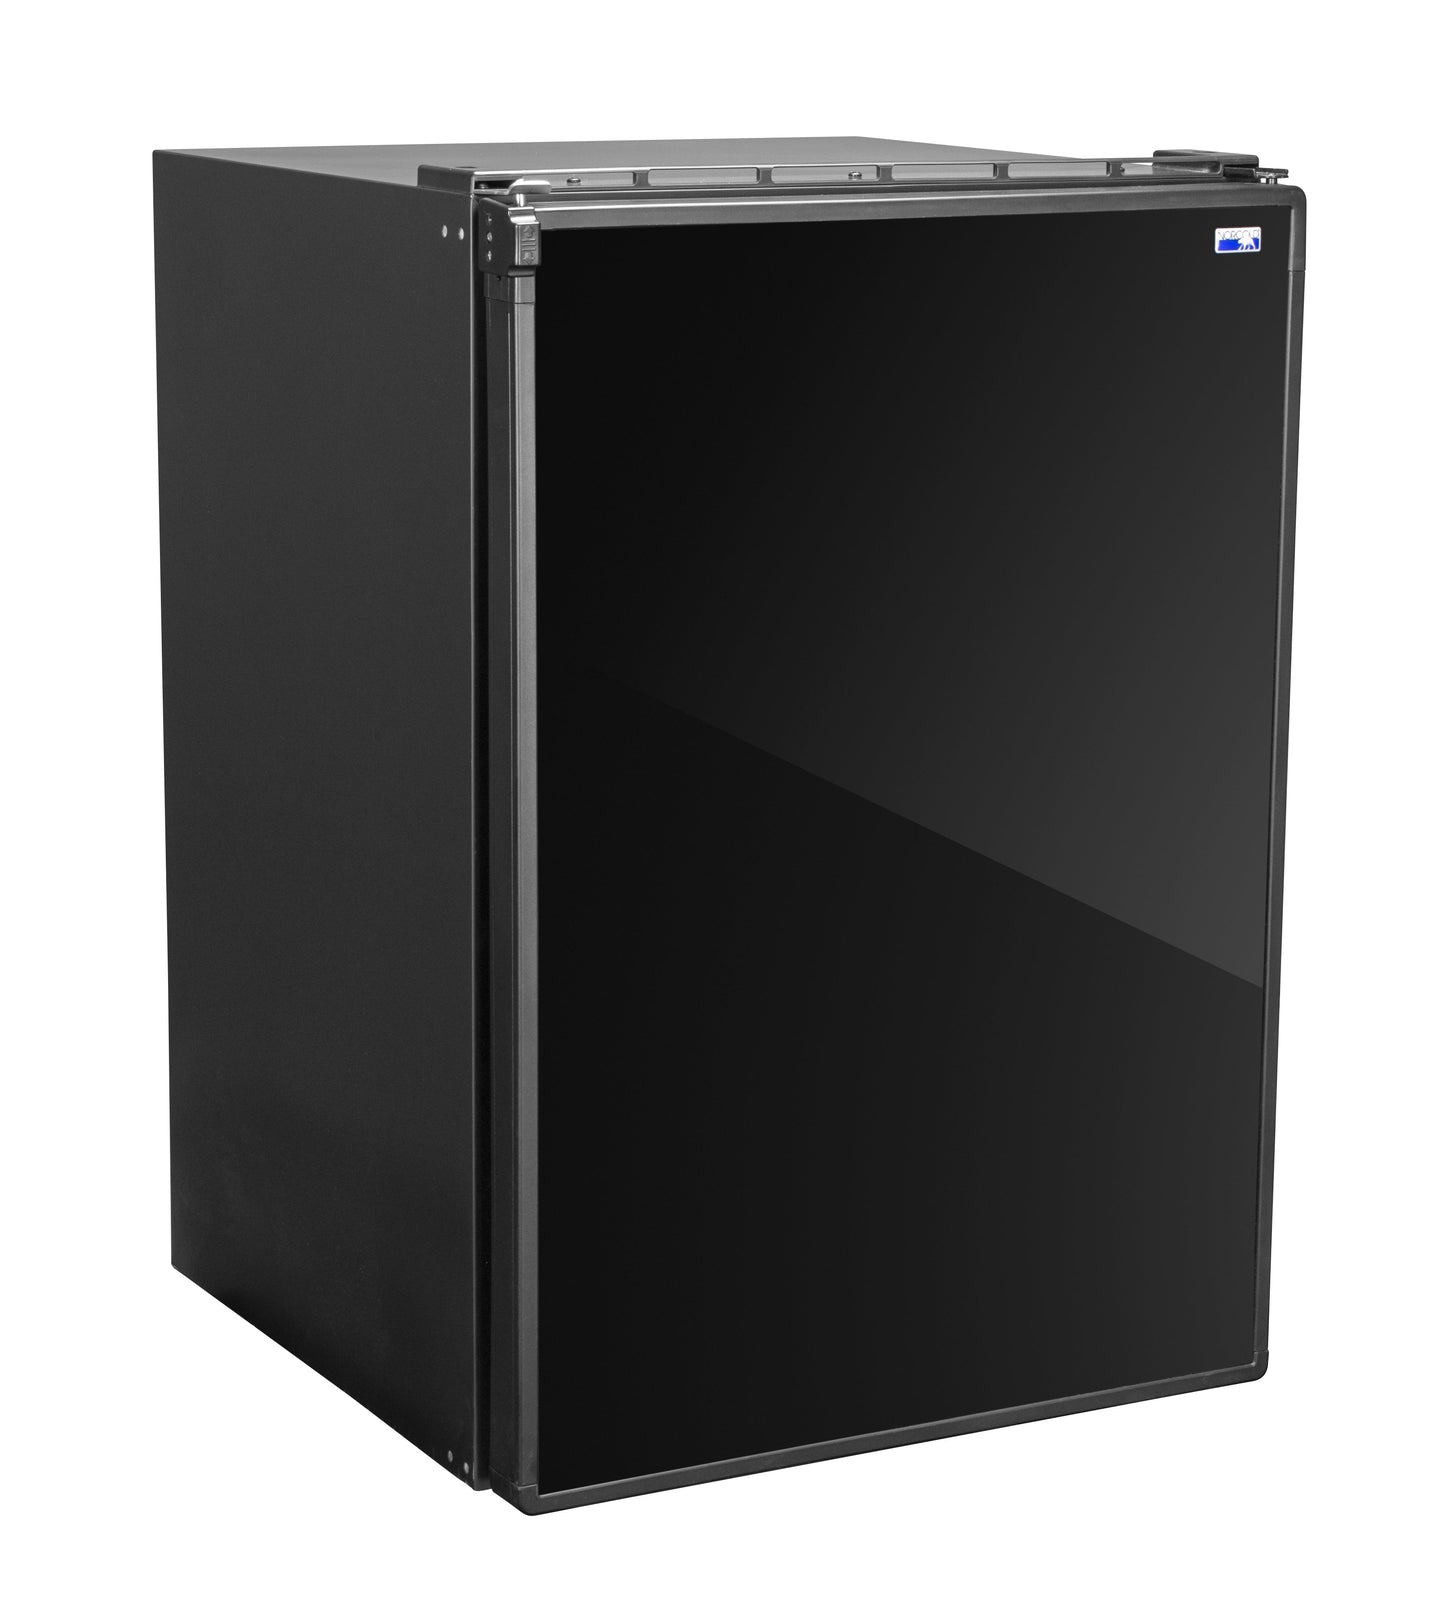 Norcold DE105 Single Compartment Refrigerator With Freezer - N6DDE105